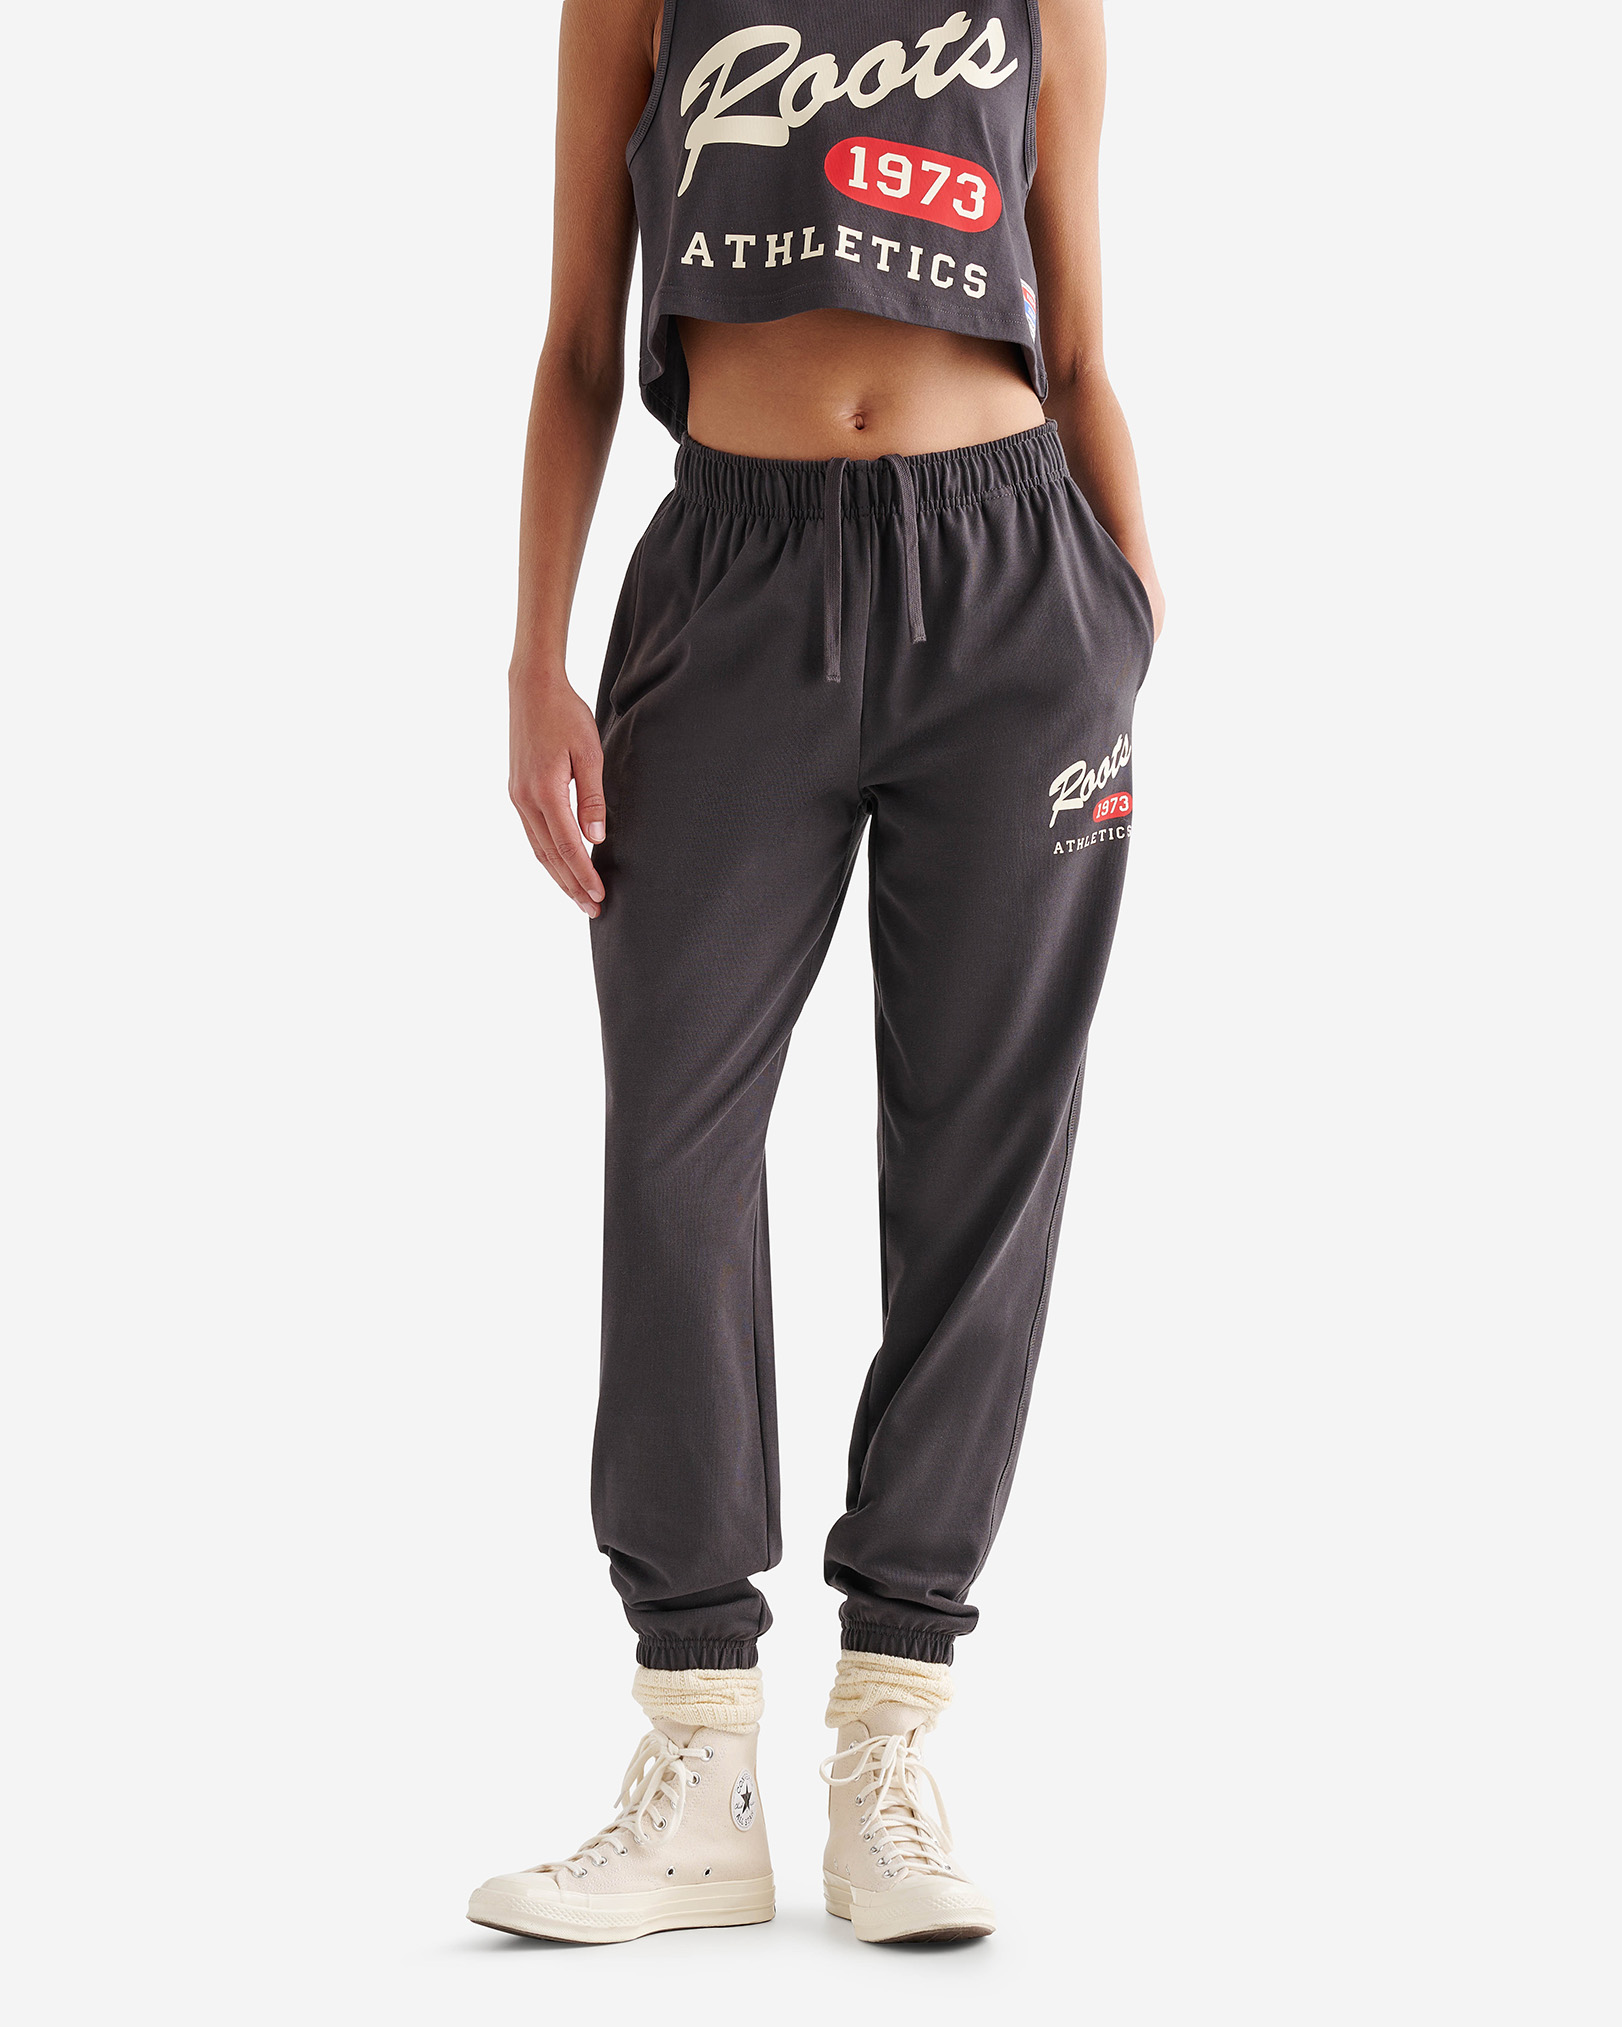 Roots Warm-Up Jersey Pant in Charcoal Black